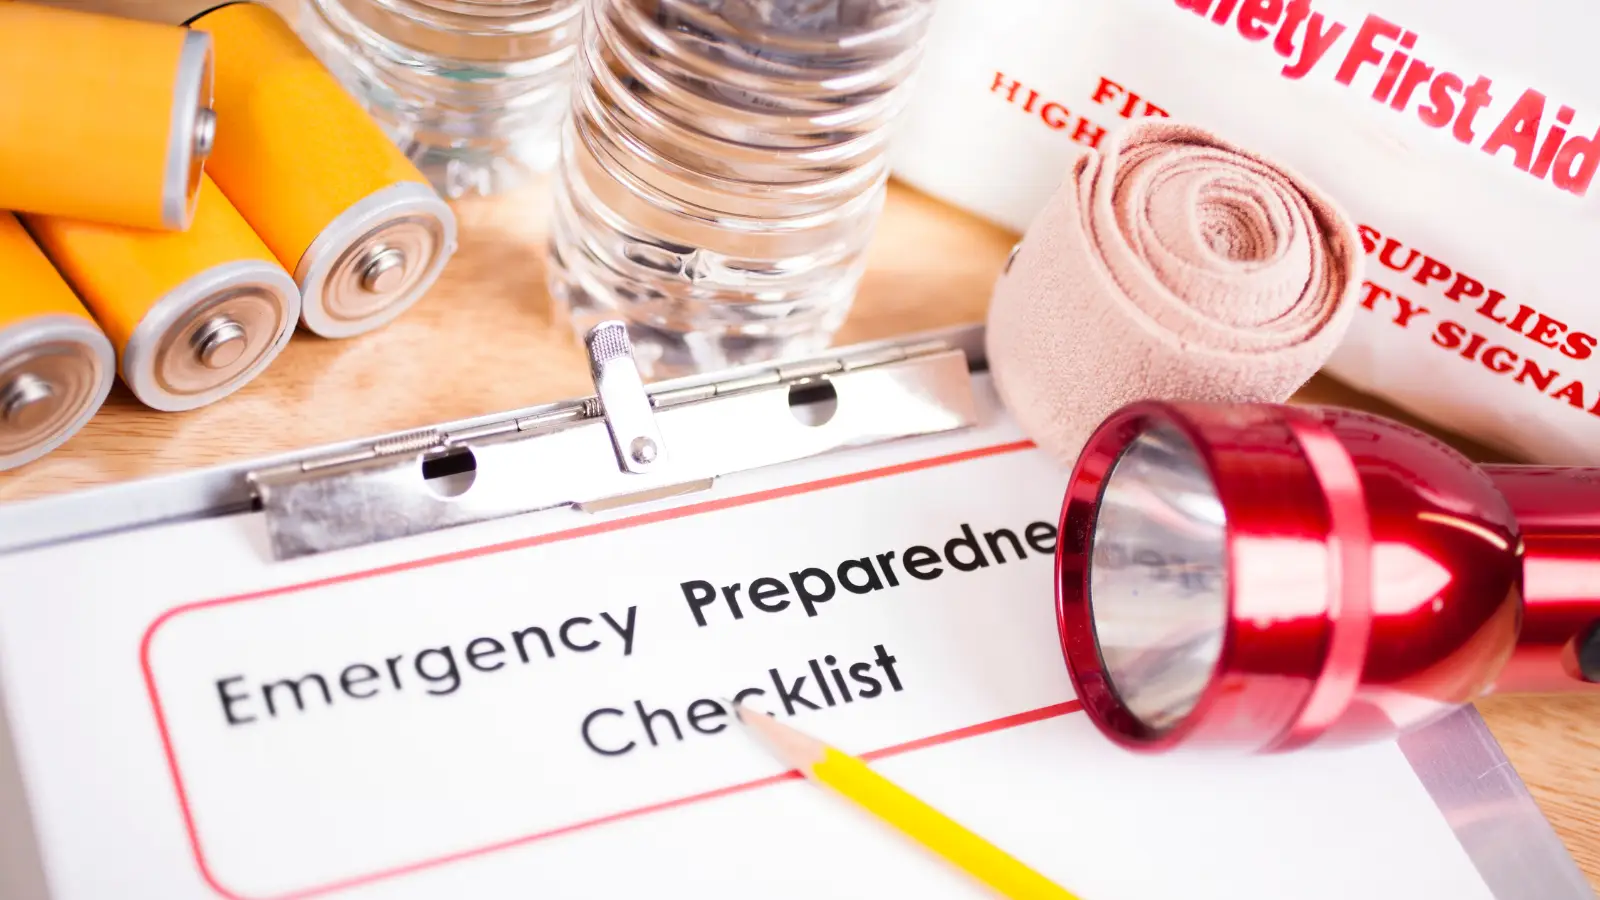 Emergency preparedness checklist with a flashlight, bandage, and bottle of water